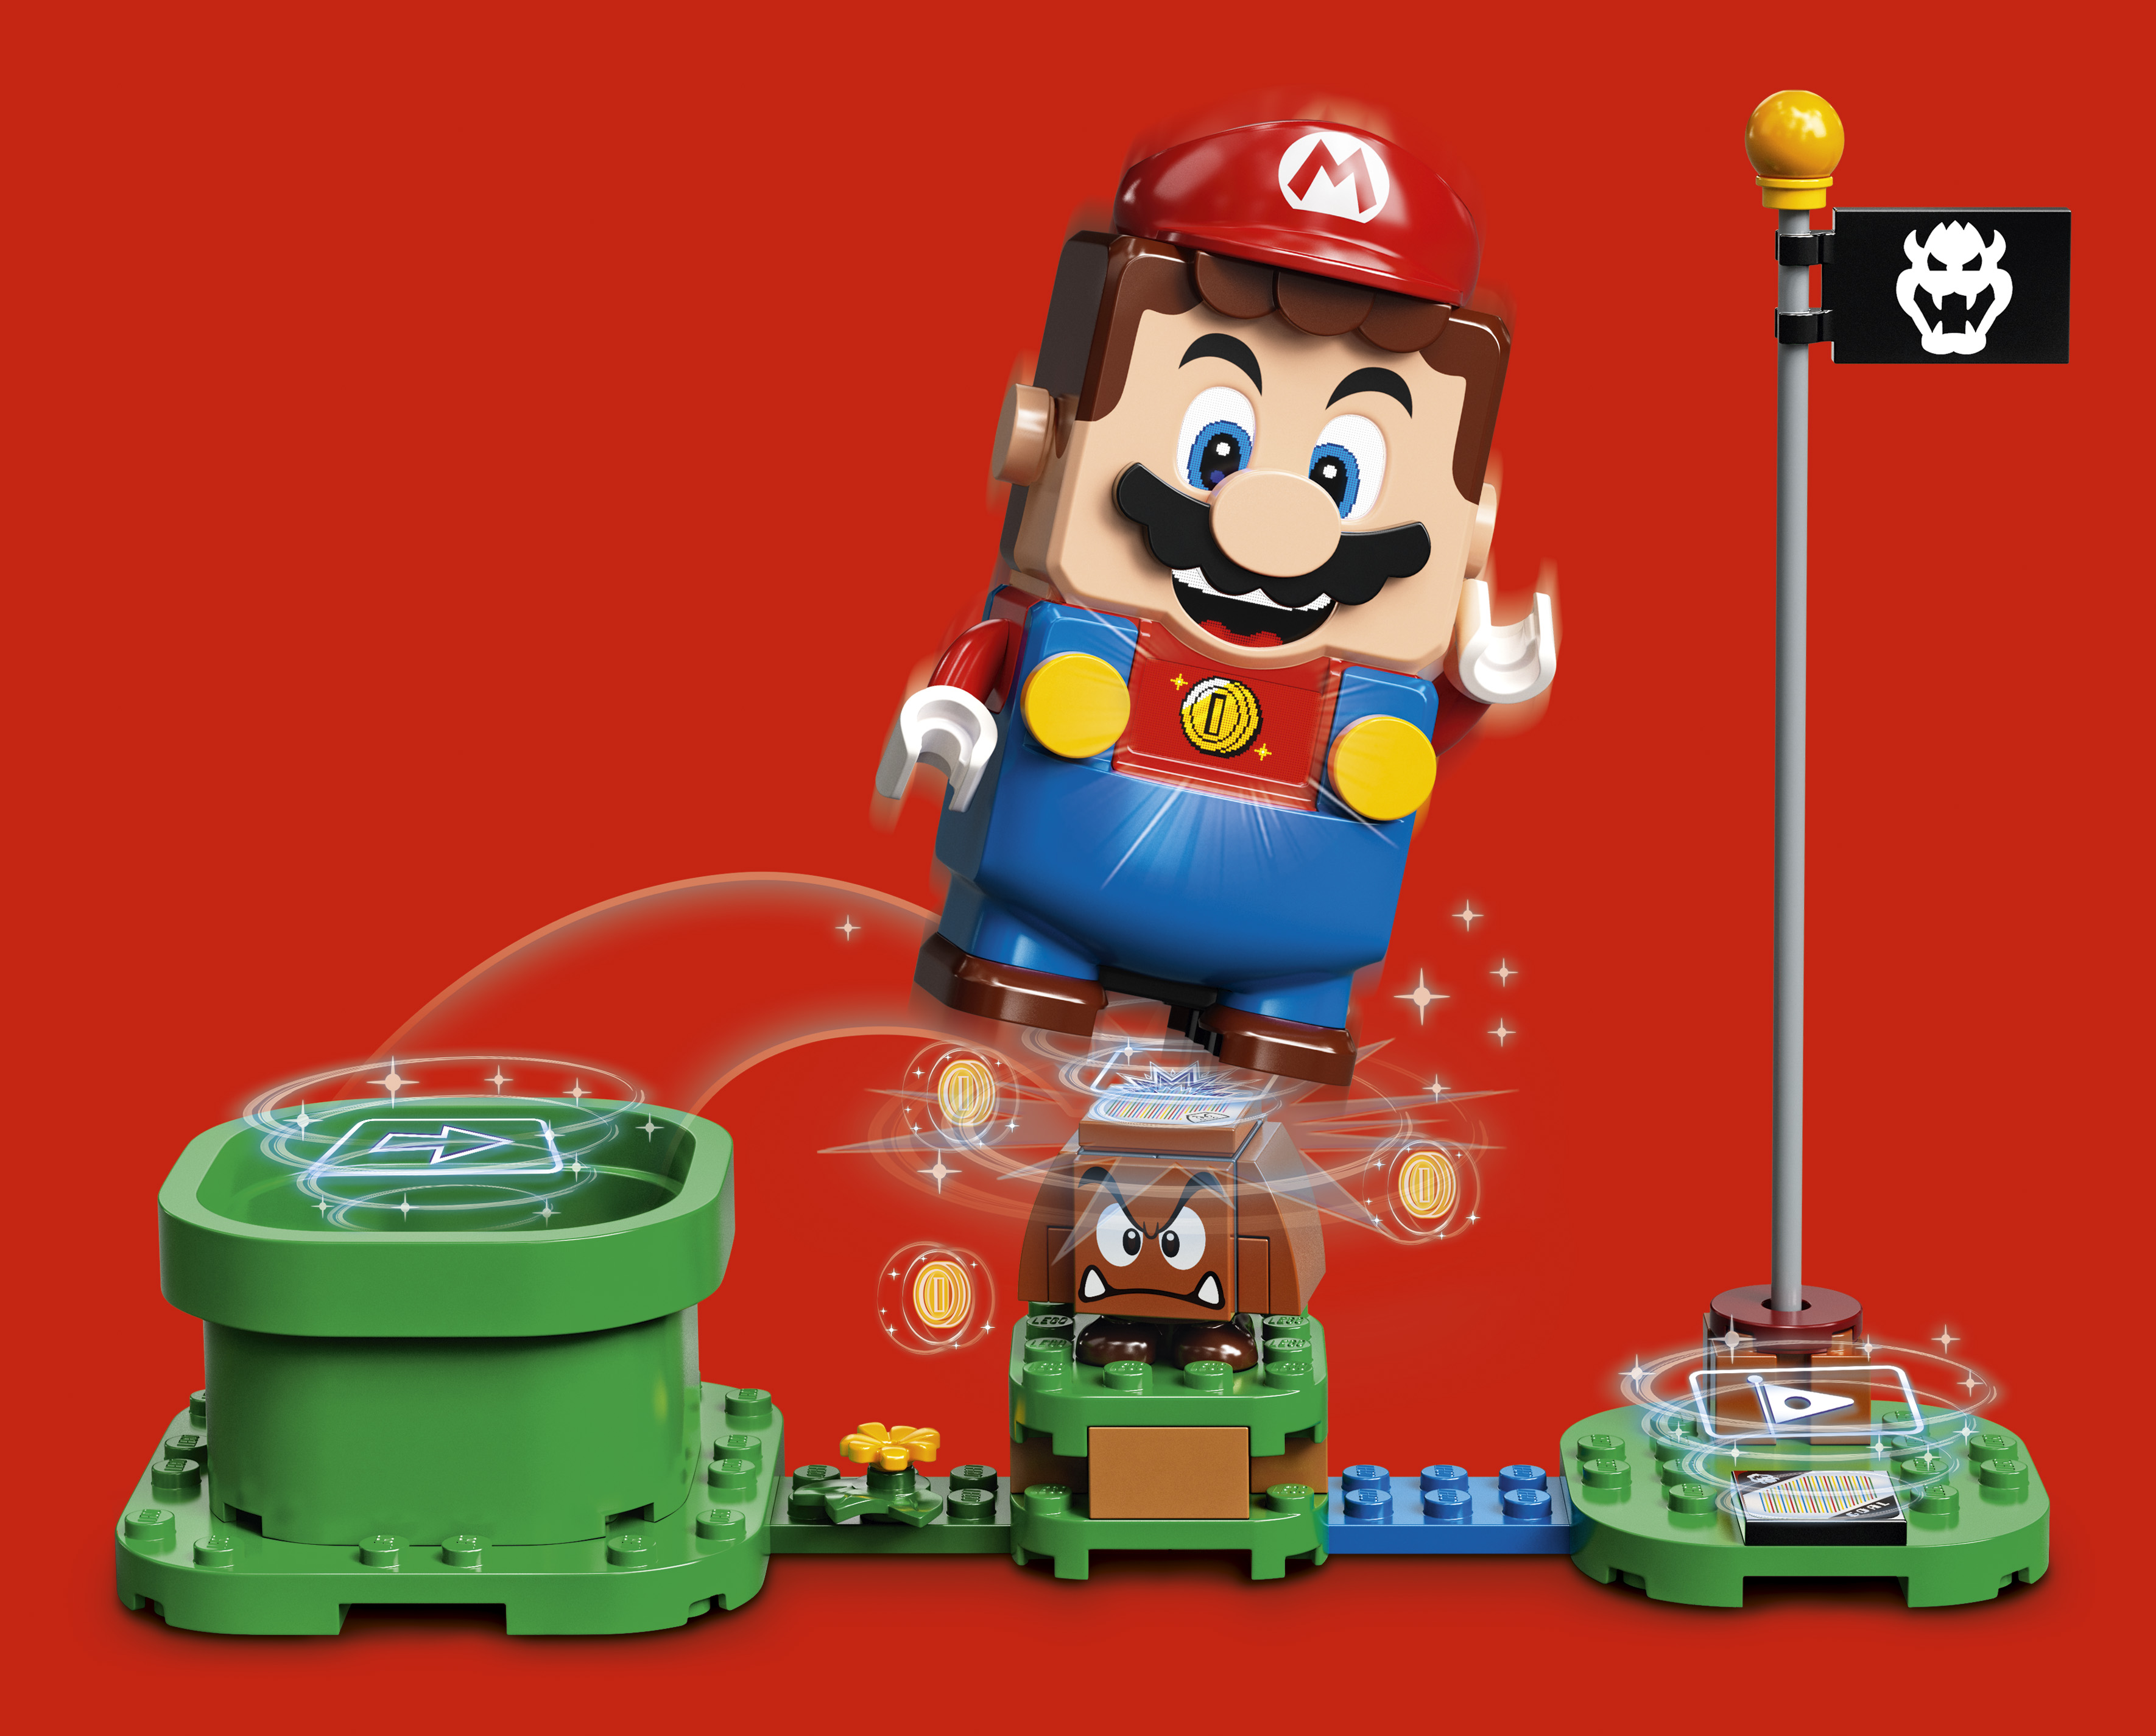 Lego teams up with Nintendo for Super Mario brick-based game | Ars Technica